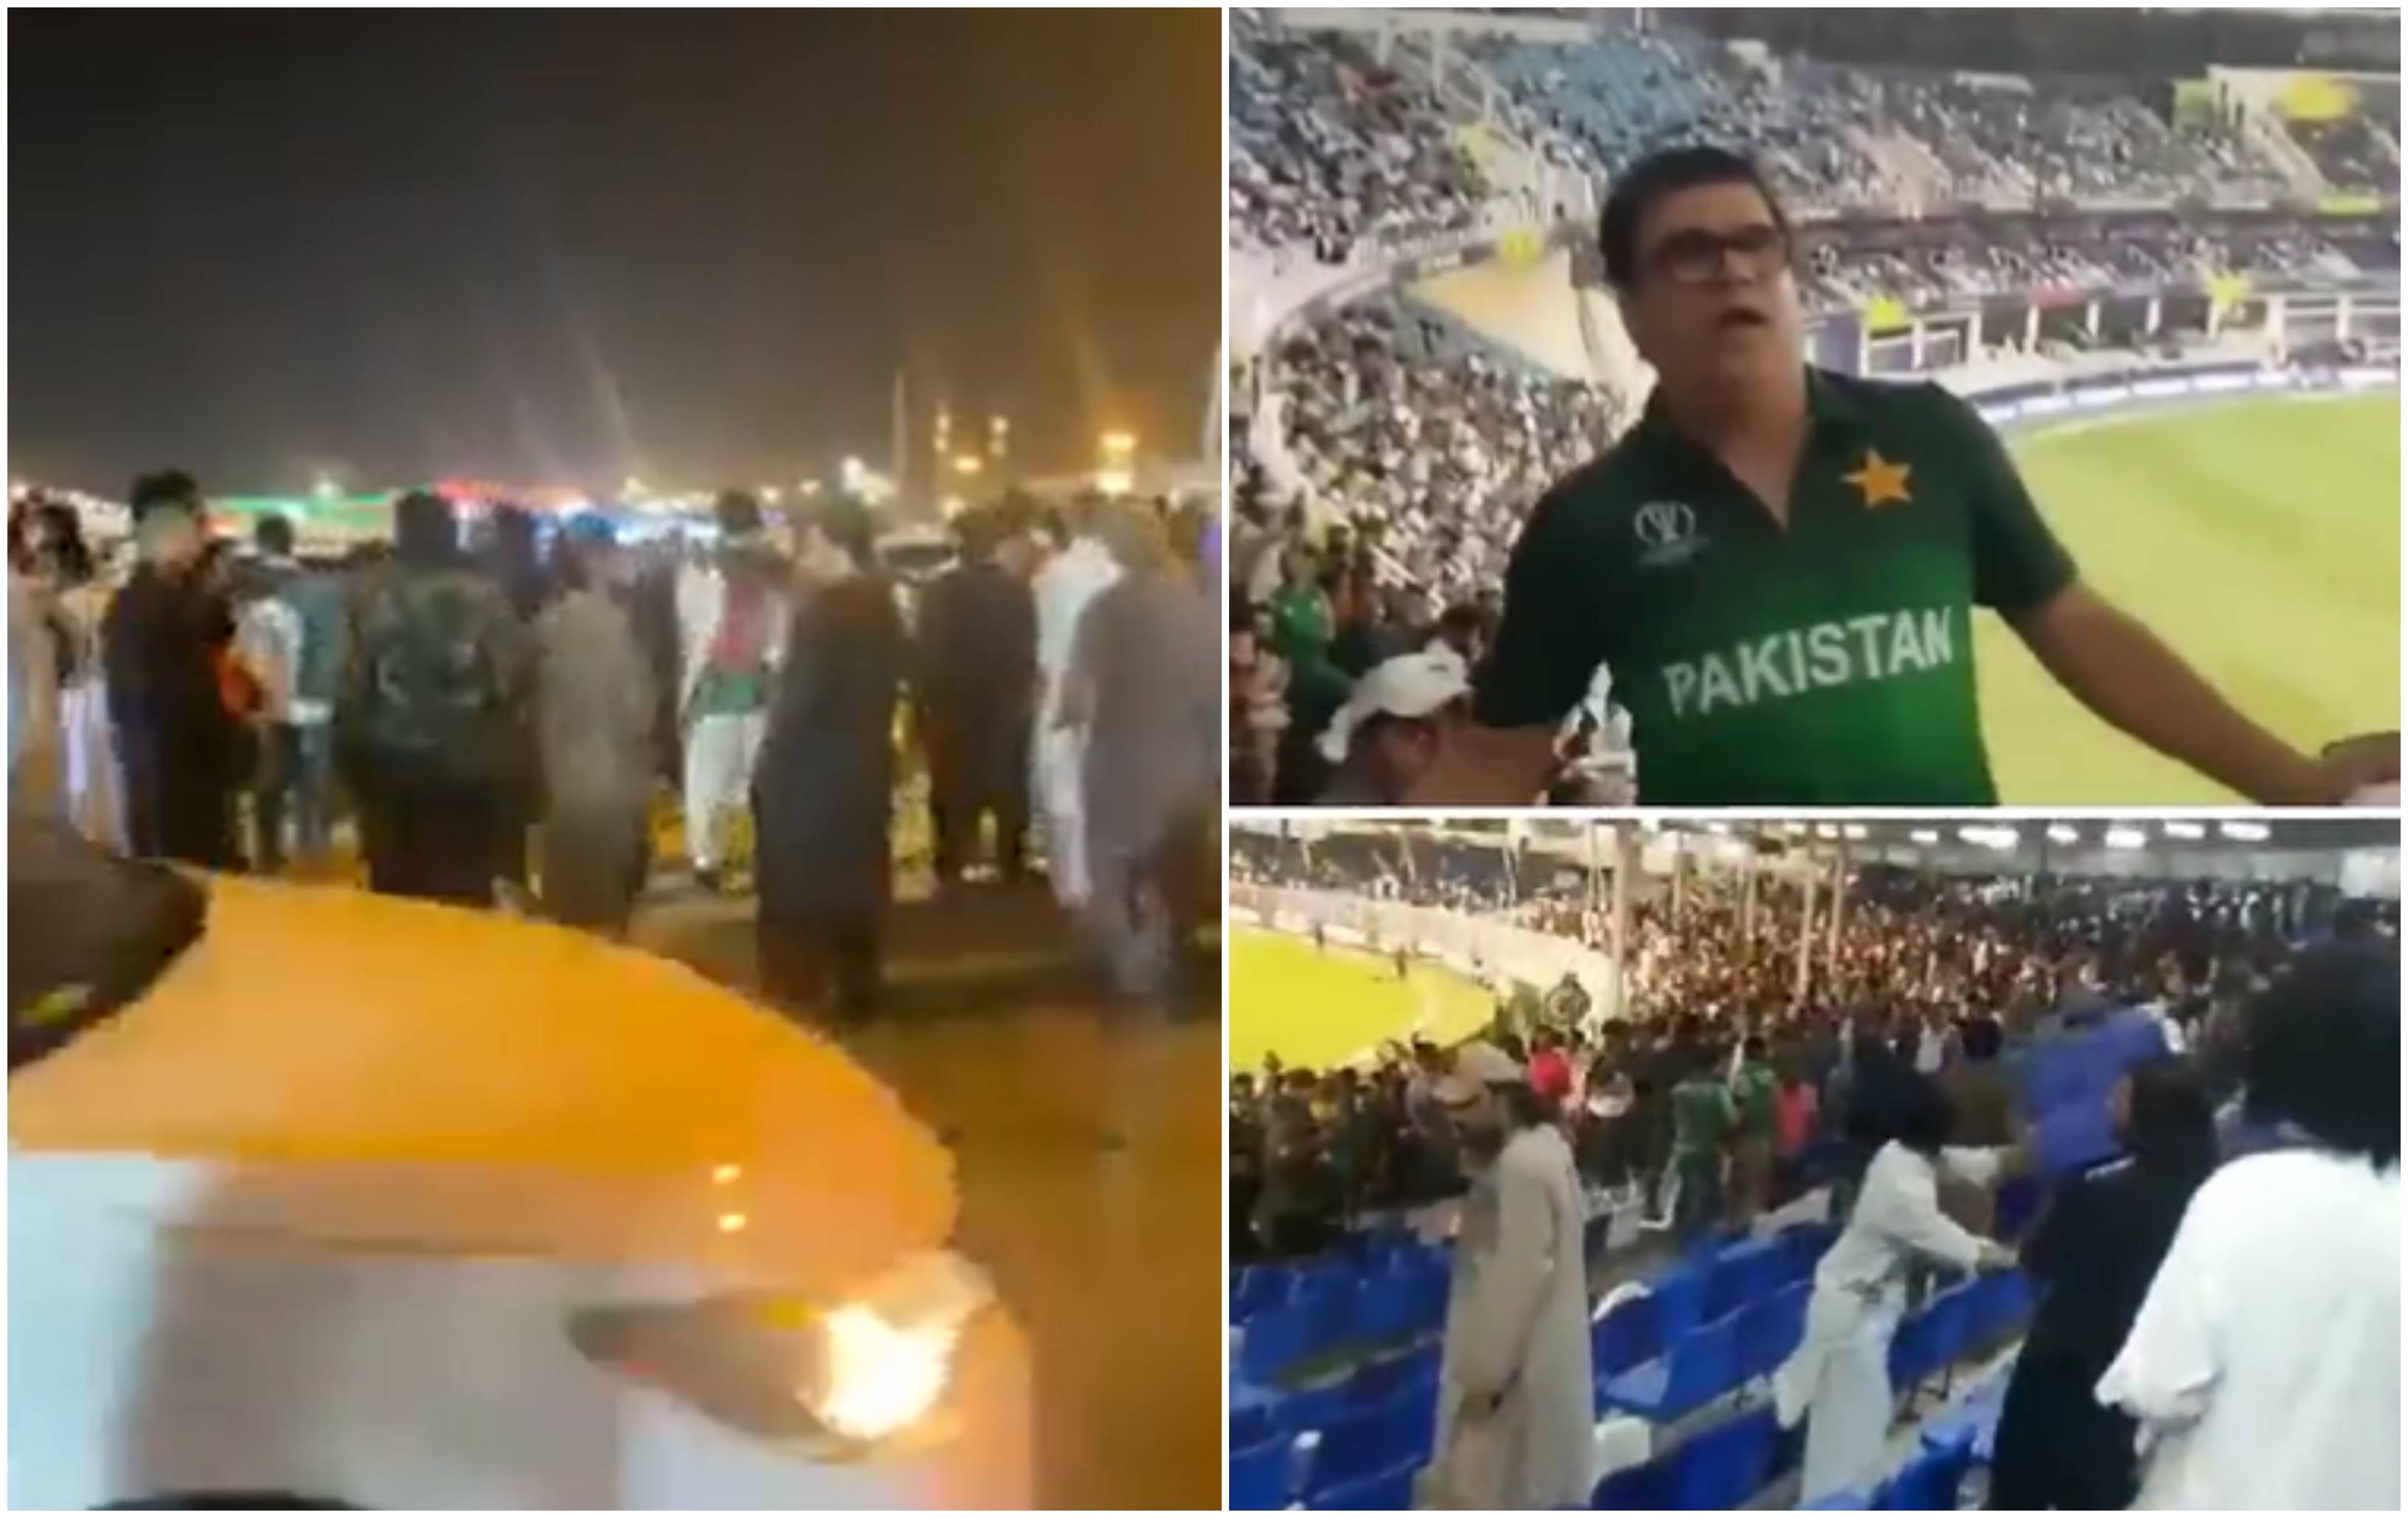 Pakistan and Afghanistan fans had a fight after the Asia Cup clash | Screengrab